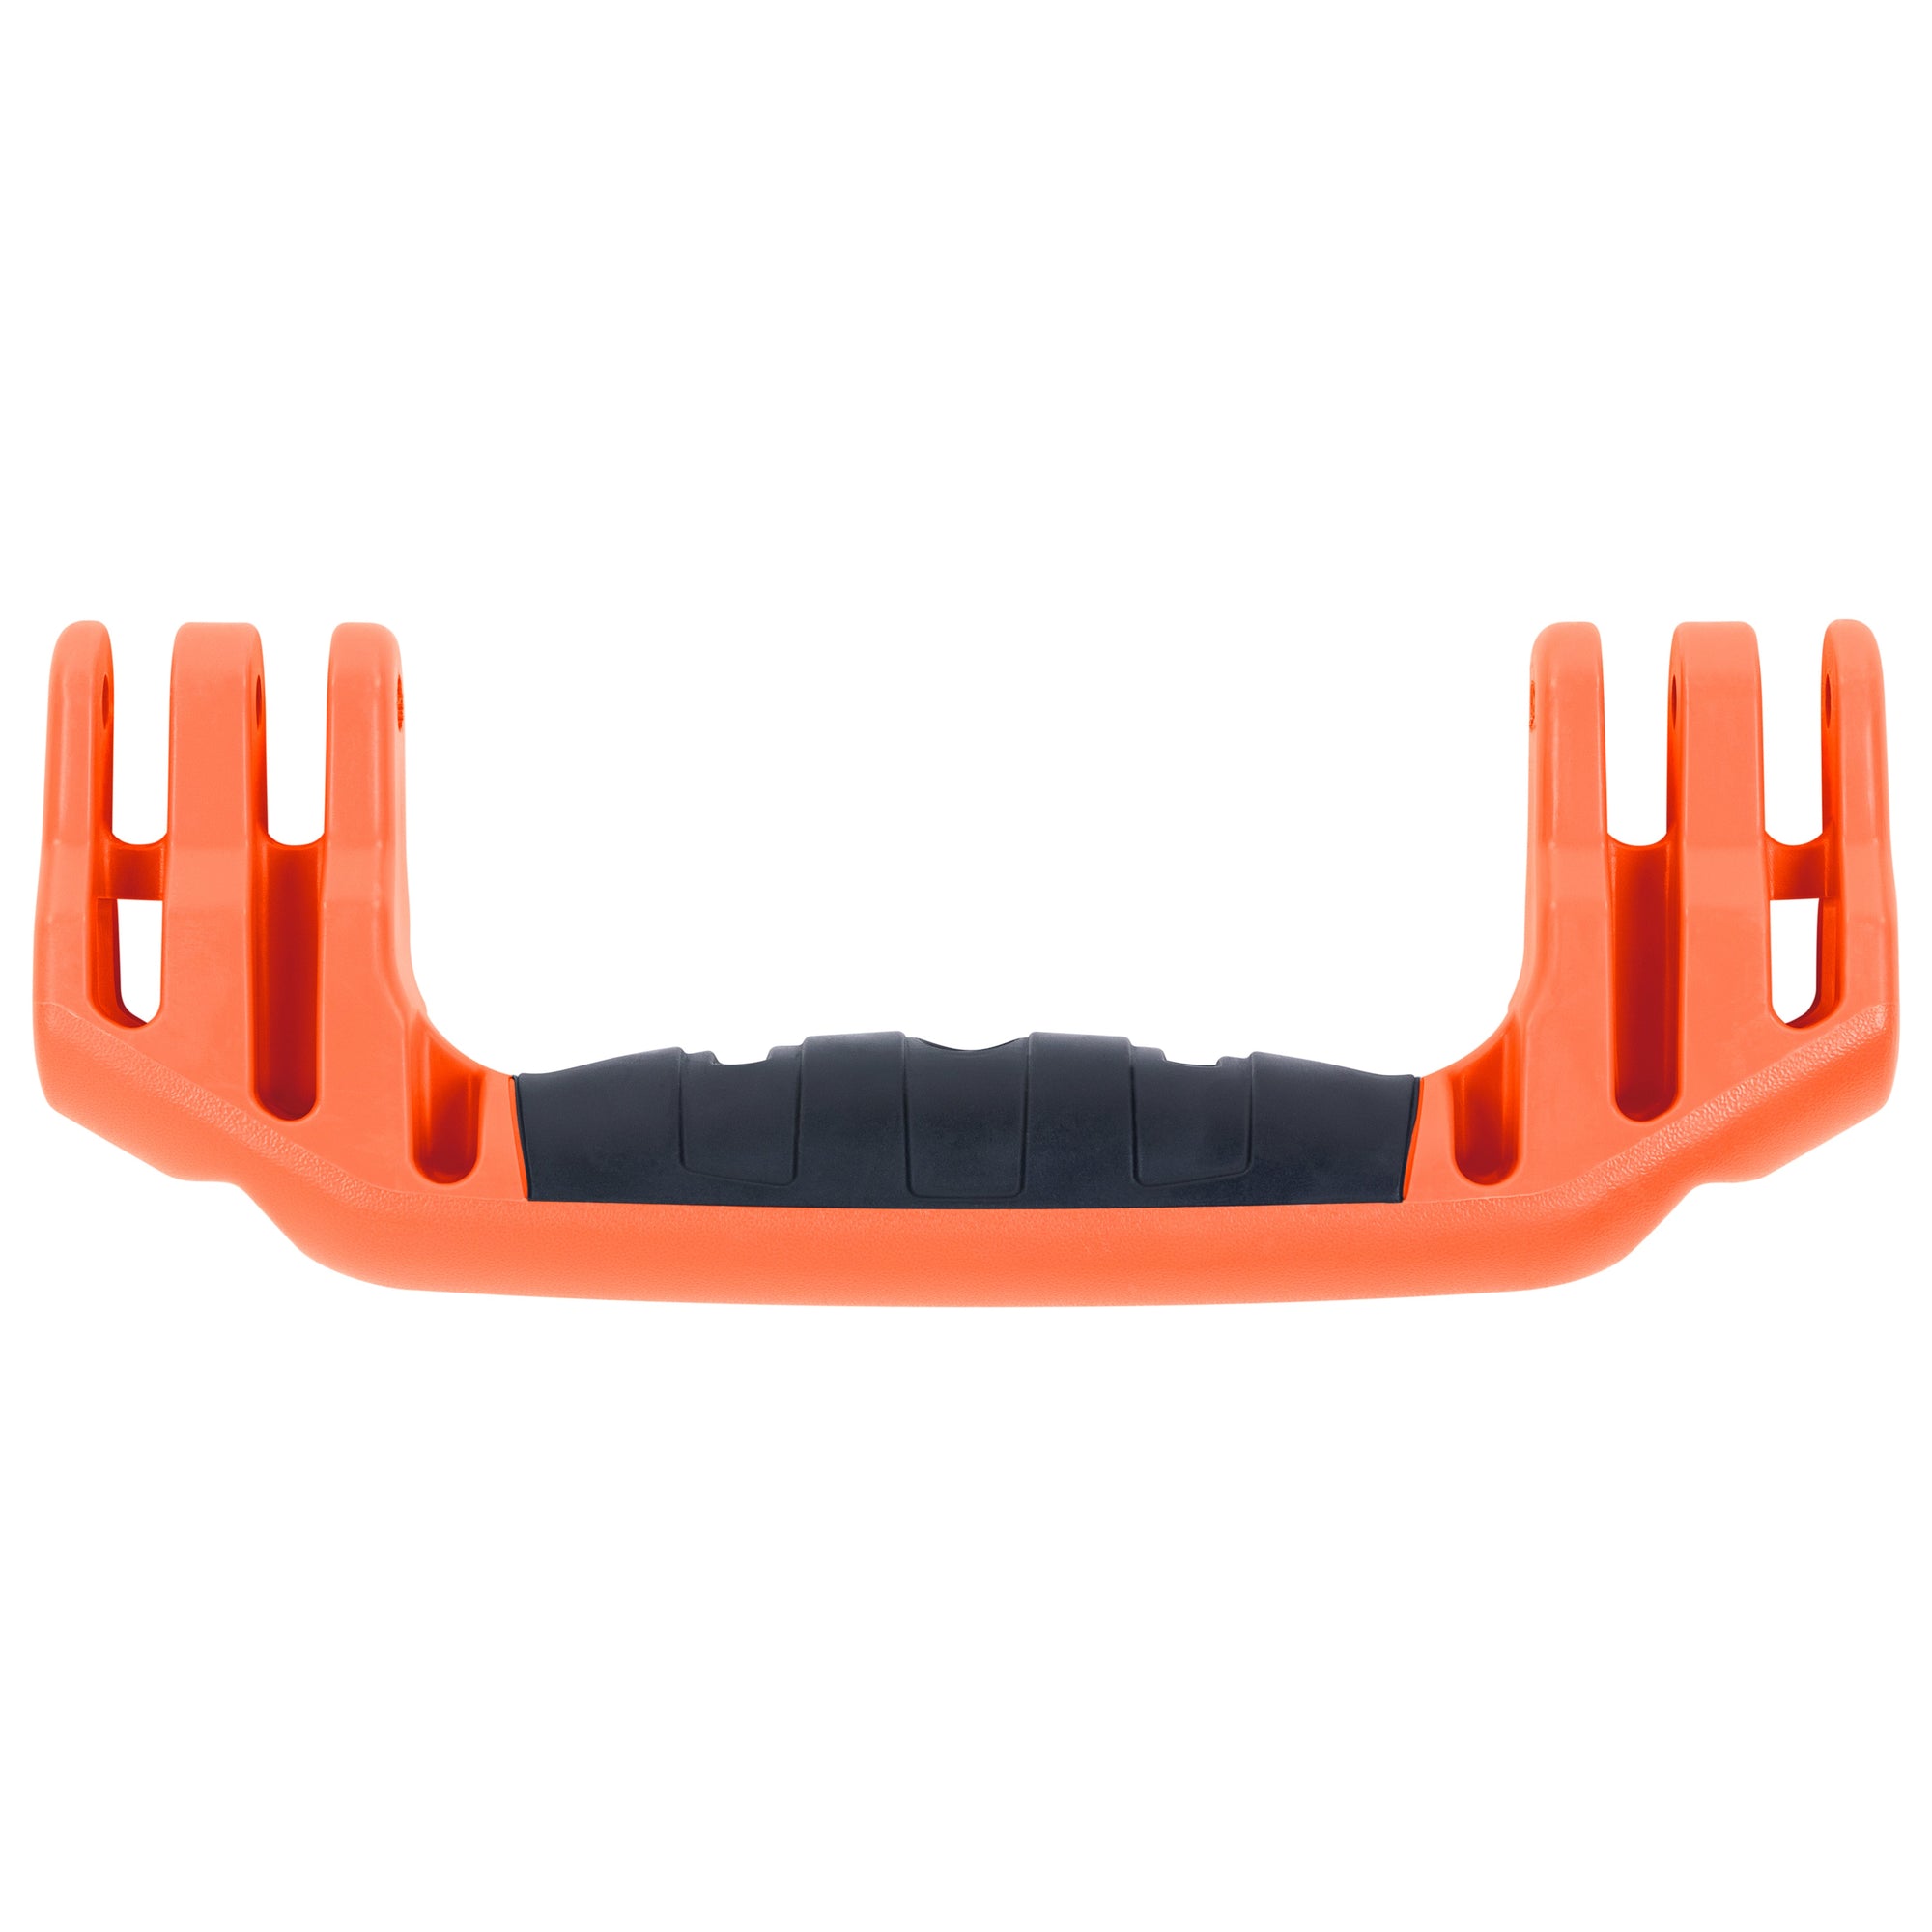 Pelican Rubber Overmolded Replacement Handle, Medium, Orange (3-Prong) ColorCase 